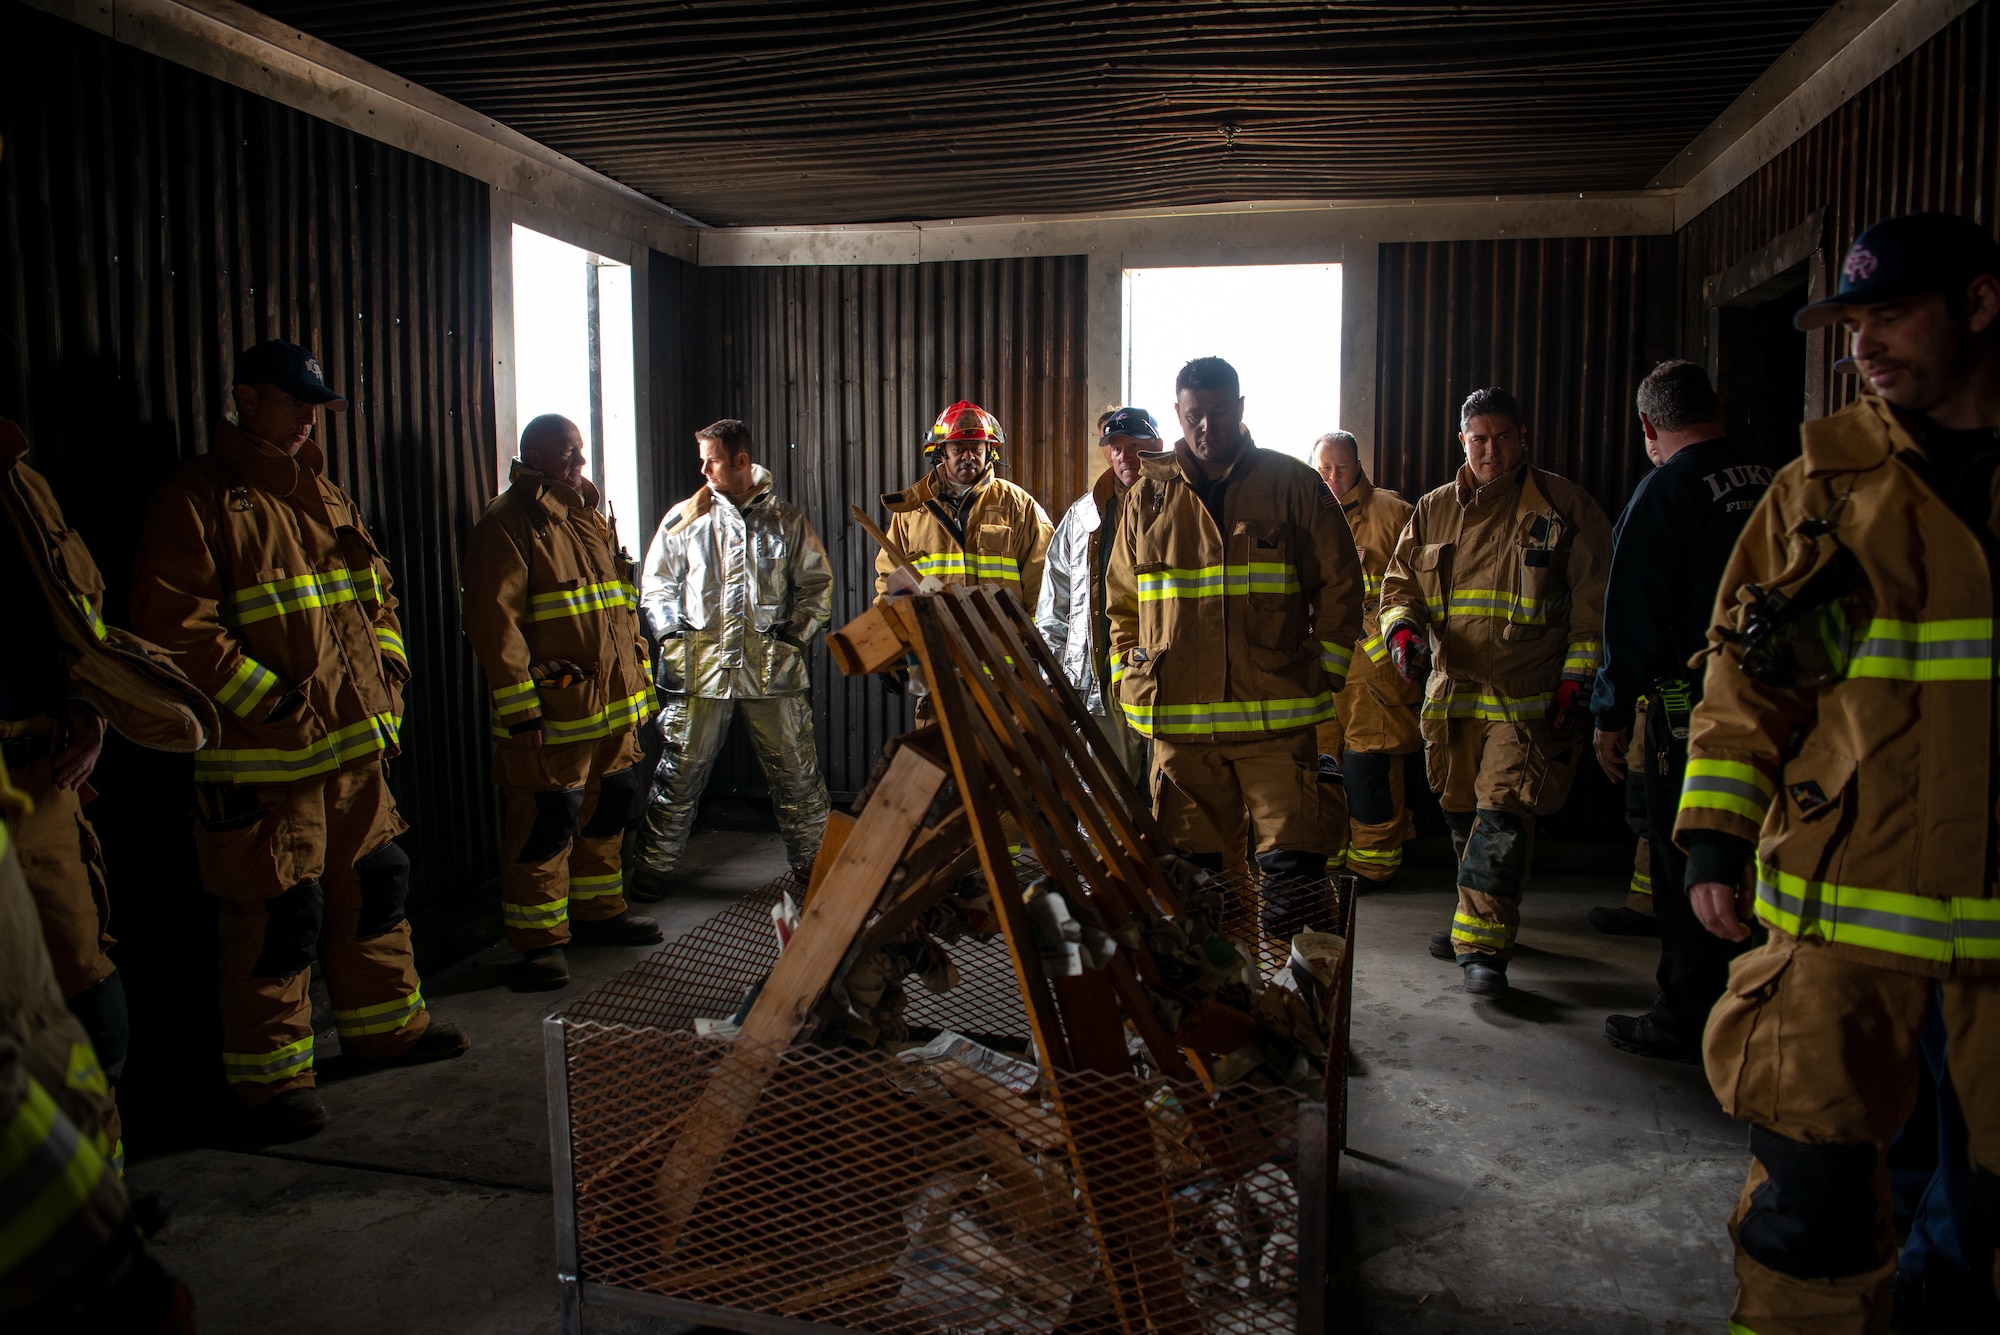 Luke firefighters assigned to the 56th Civil Engineer Squadron Fire Department and Gila Bend Air Force Auxiliary Field, listen to a safety brief before igniting a training structural fire, Nov. 14, 2018 at Luke Air Force Base, Ariz.